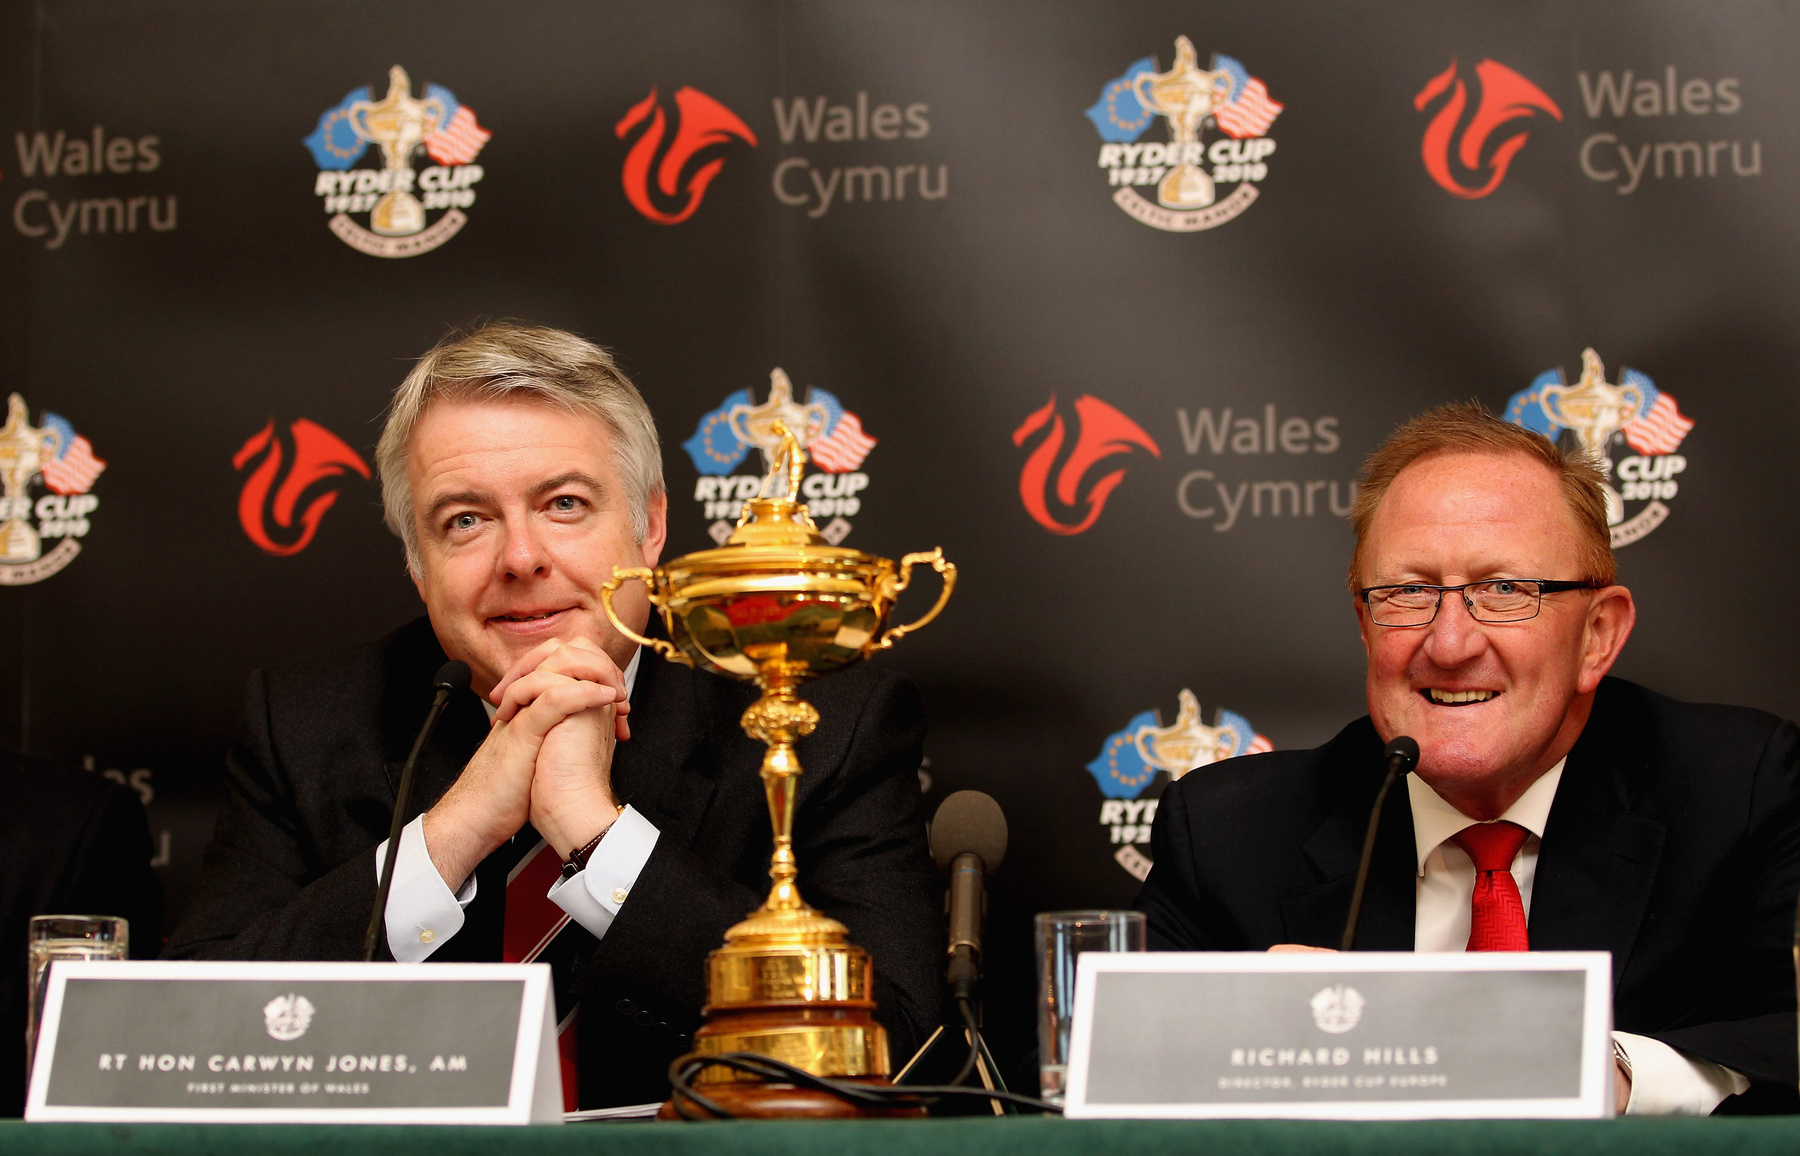 Economic Impact Survey results for The 2010 Ryder Cup